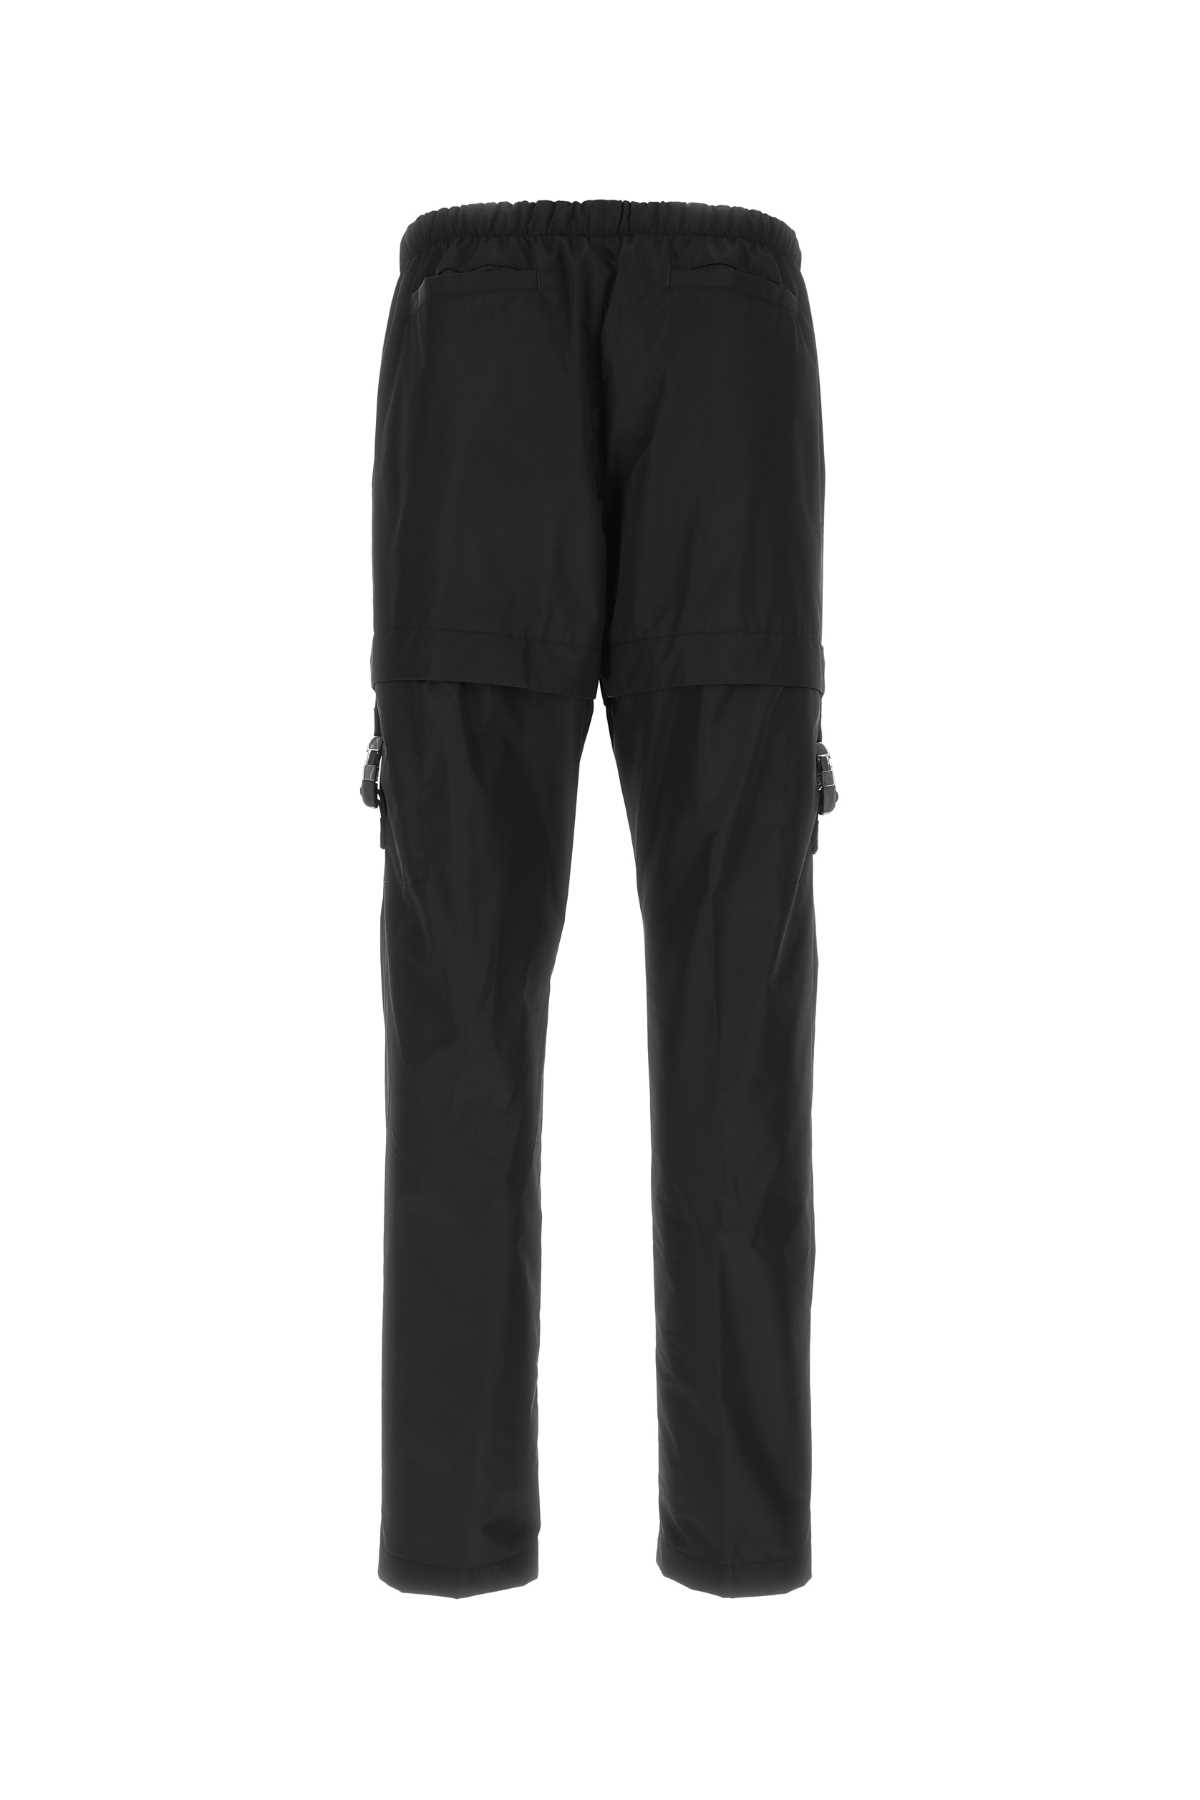 Givenchy Black Polyester Cargo Pant In 001